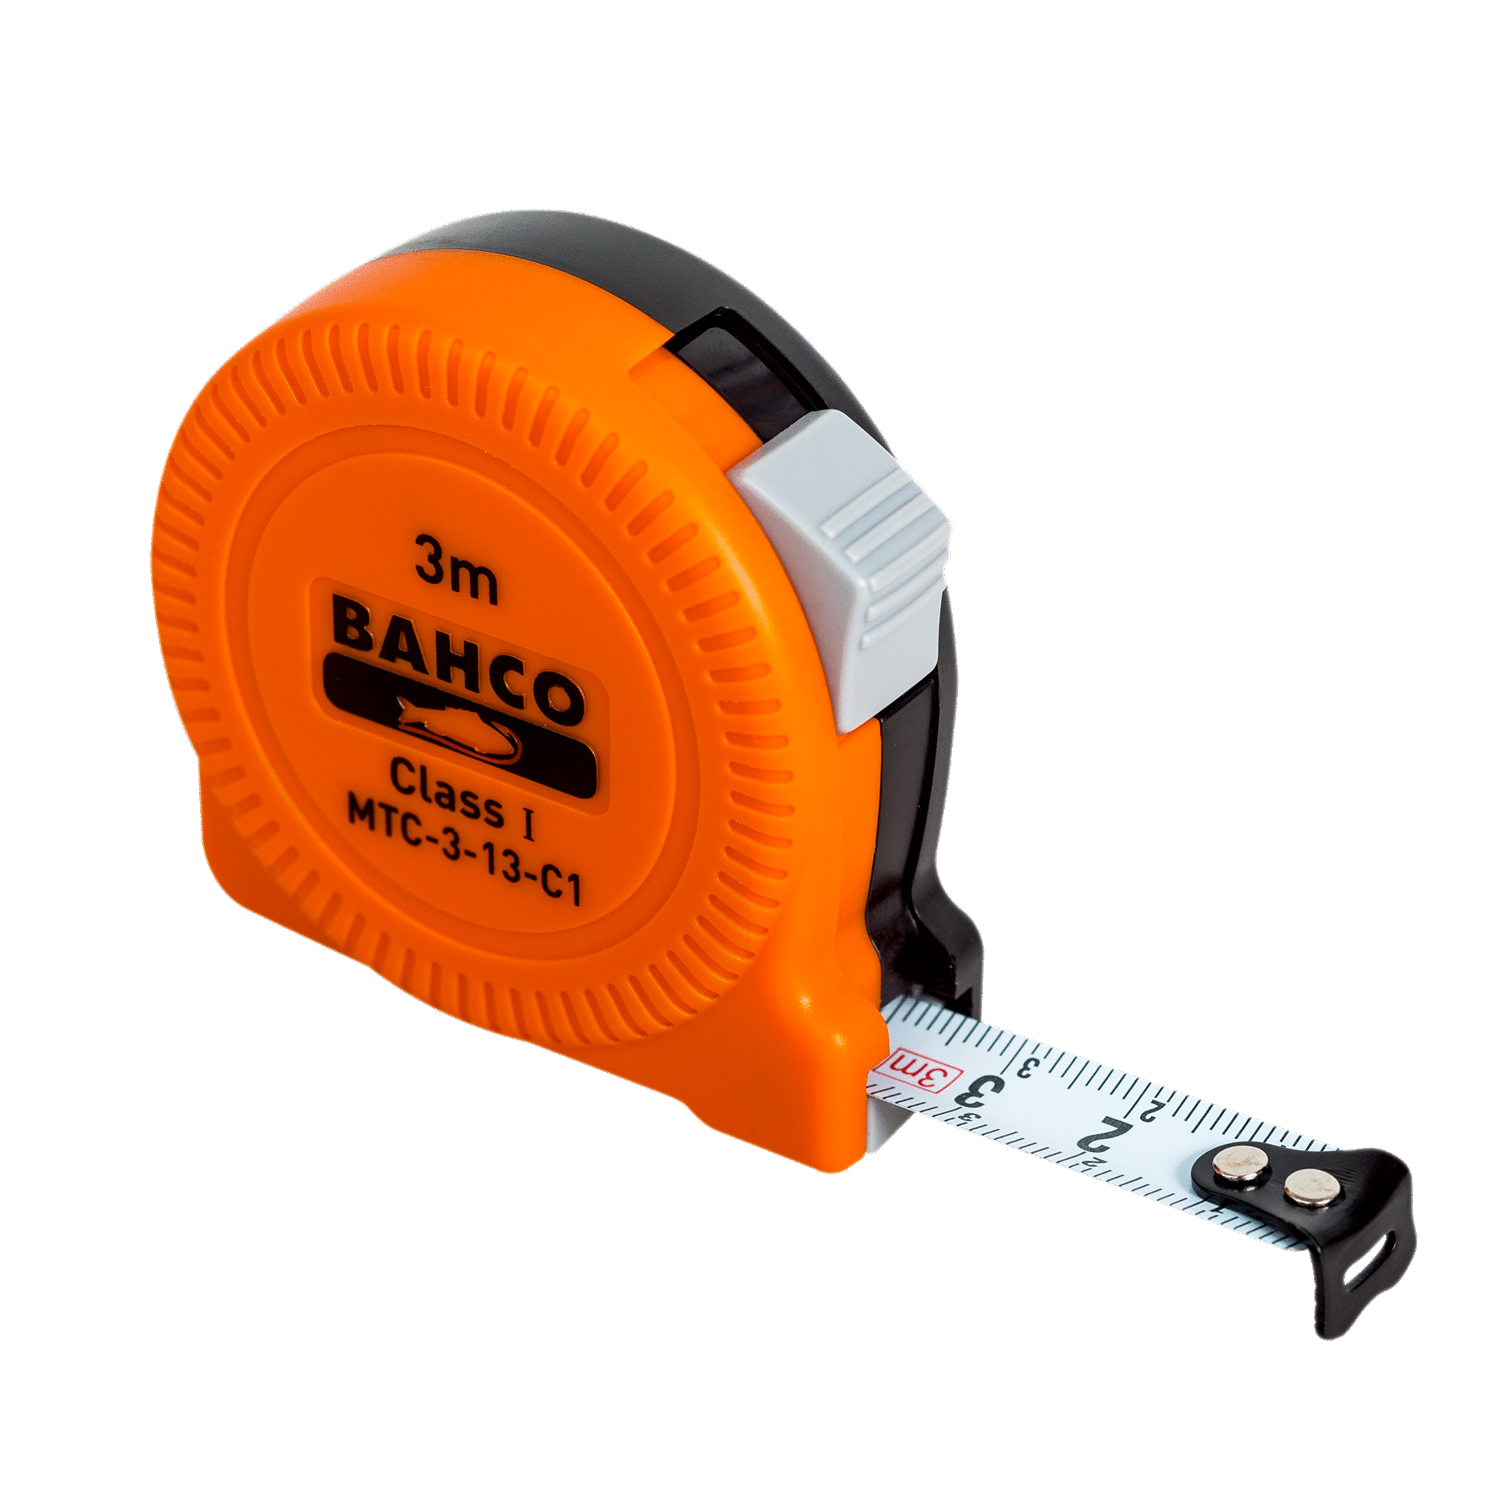 BAHCO MTC_C1 Short Measuring Tape with ABS Grip Compact Class-I - Premium Measuring Tape from BAHCO - Shop now at Yew Aik.